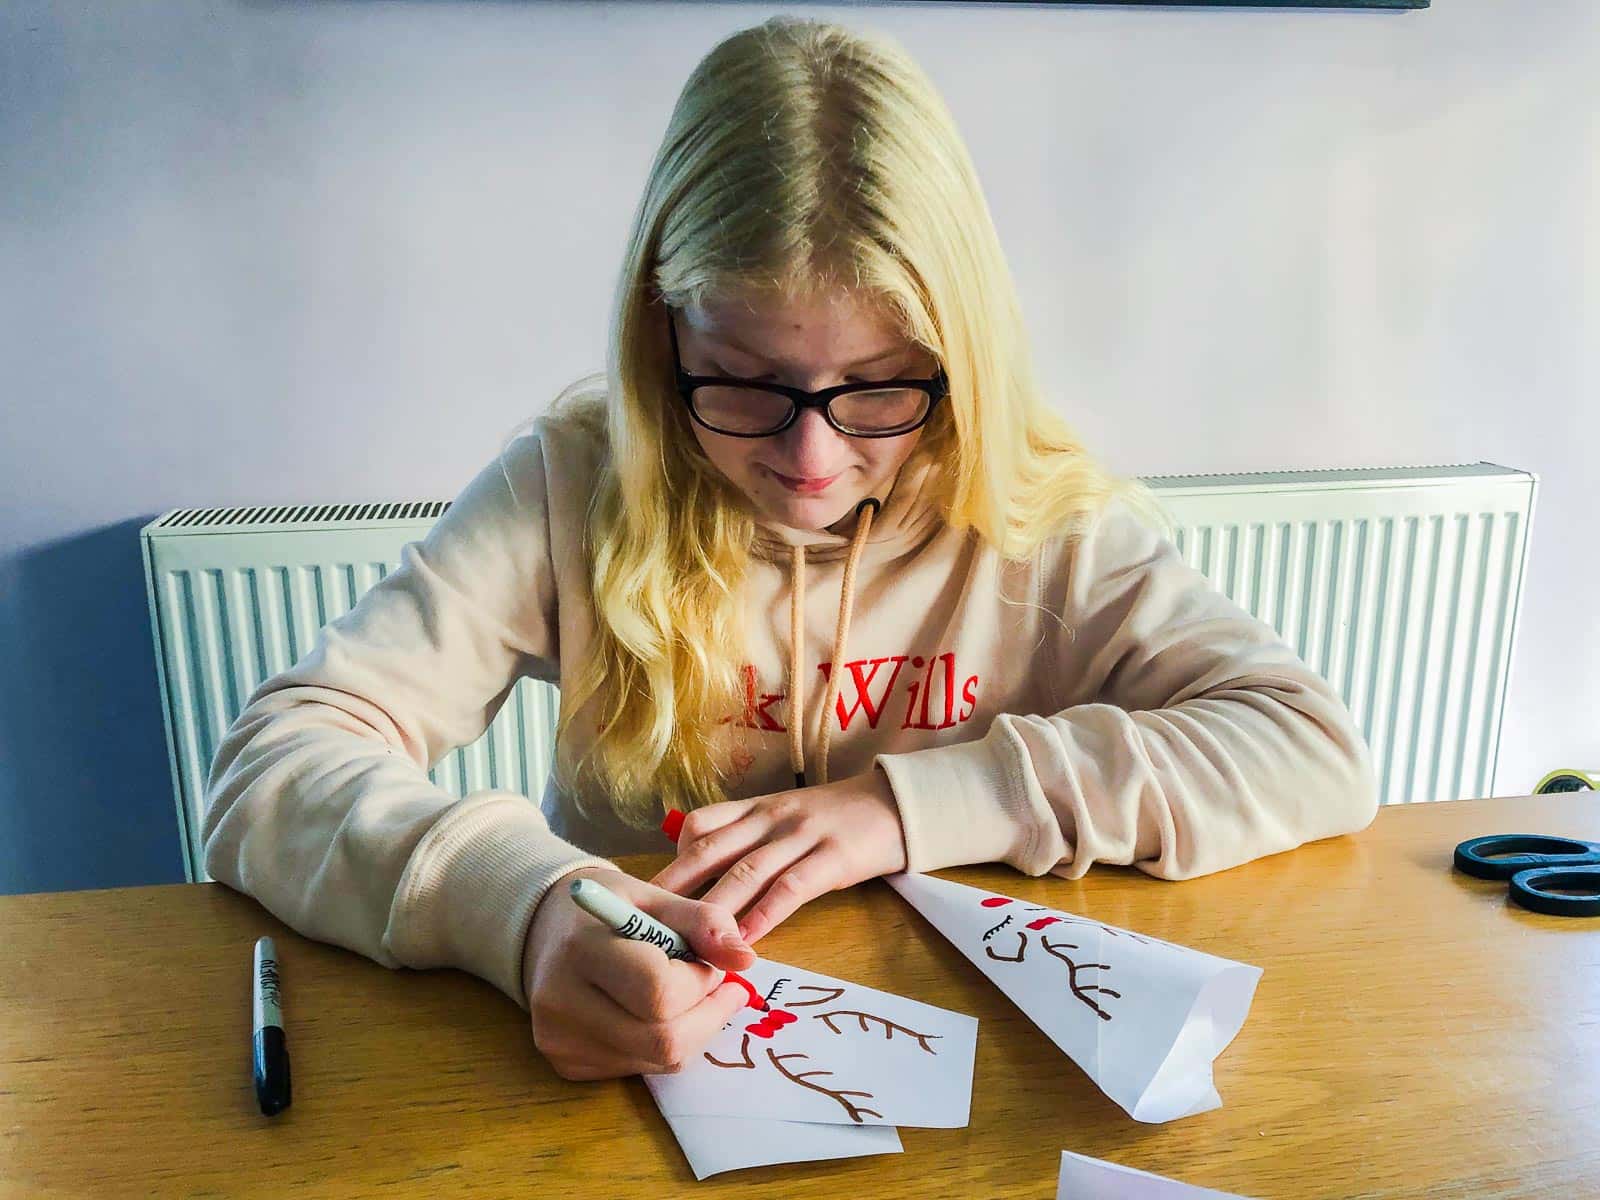 A young girl drawing reindeer faces on paper cones.